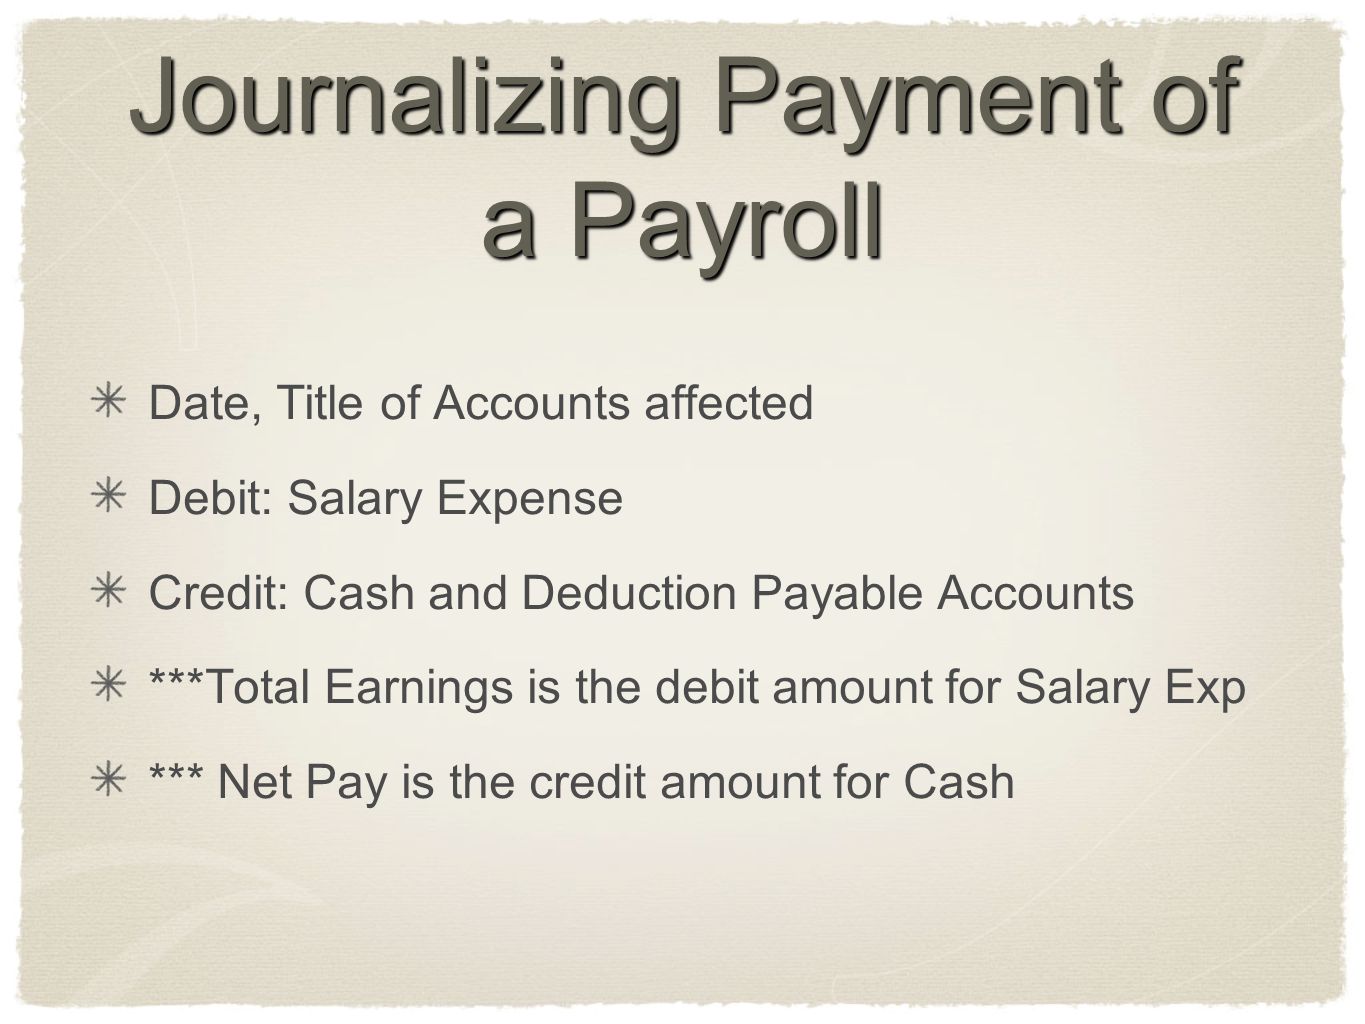 Journalizing Payment of a Payroll